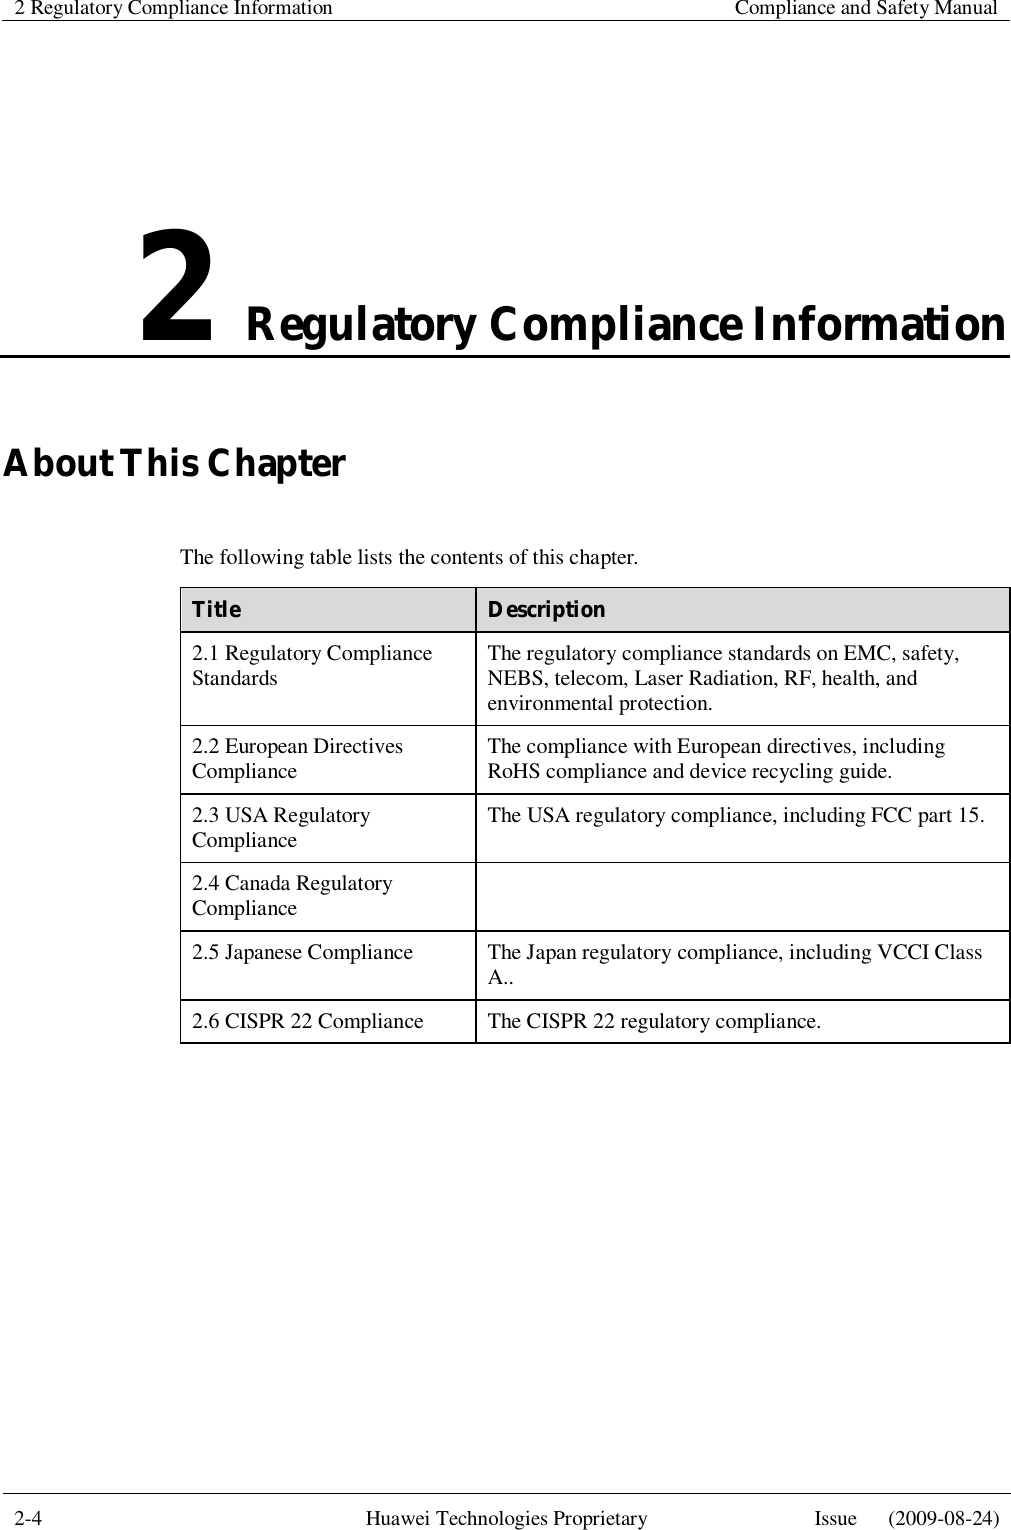 2 Regulatory Compliance Information    Compliance and Safety Manual  2-4  Huawei Technologies Proprietary  Issue   (2009-08-24)  2 Regulatory Compliance Information About This Chapter The following table lists the contents of this chapter. Title  Description 2.1 Regulatory Compliance Standards  The regulatory compliance standards on EMC, safety, NEBS, telecom, Laser Radiation, RF, health, and environmental protection. 2.2 European Directives Compliance  The compliance with European directives, including RoHS compliance and device recycling guide. 2.3 USA Regulatory Compliance  The USA regulatory compliance, including FCC part 15. 2.4 Canada Regulatory Compliance   2.5 Japanese Compliance  The Japan regulatory compliance, including VCCI Class A.. 2.6 CISPR 22 Compliance  The CISPR 22 regulatory compliance.  